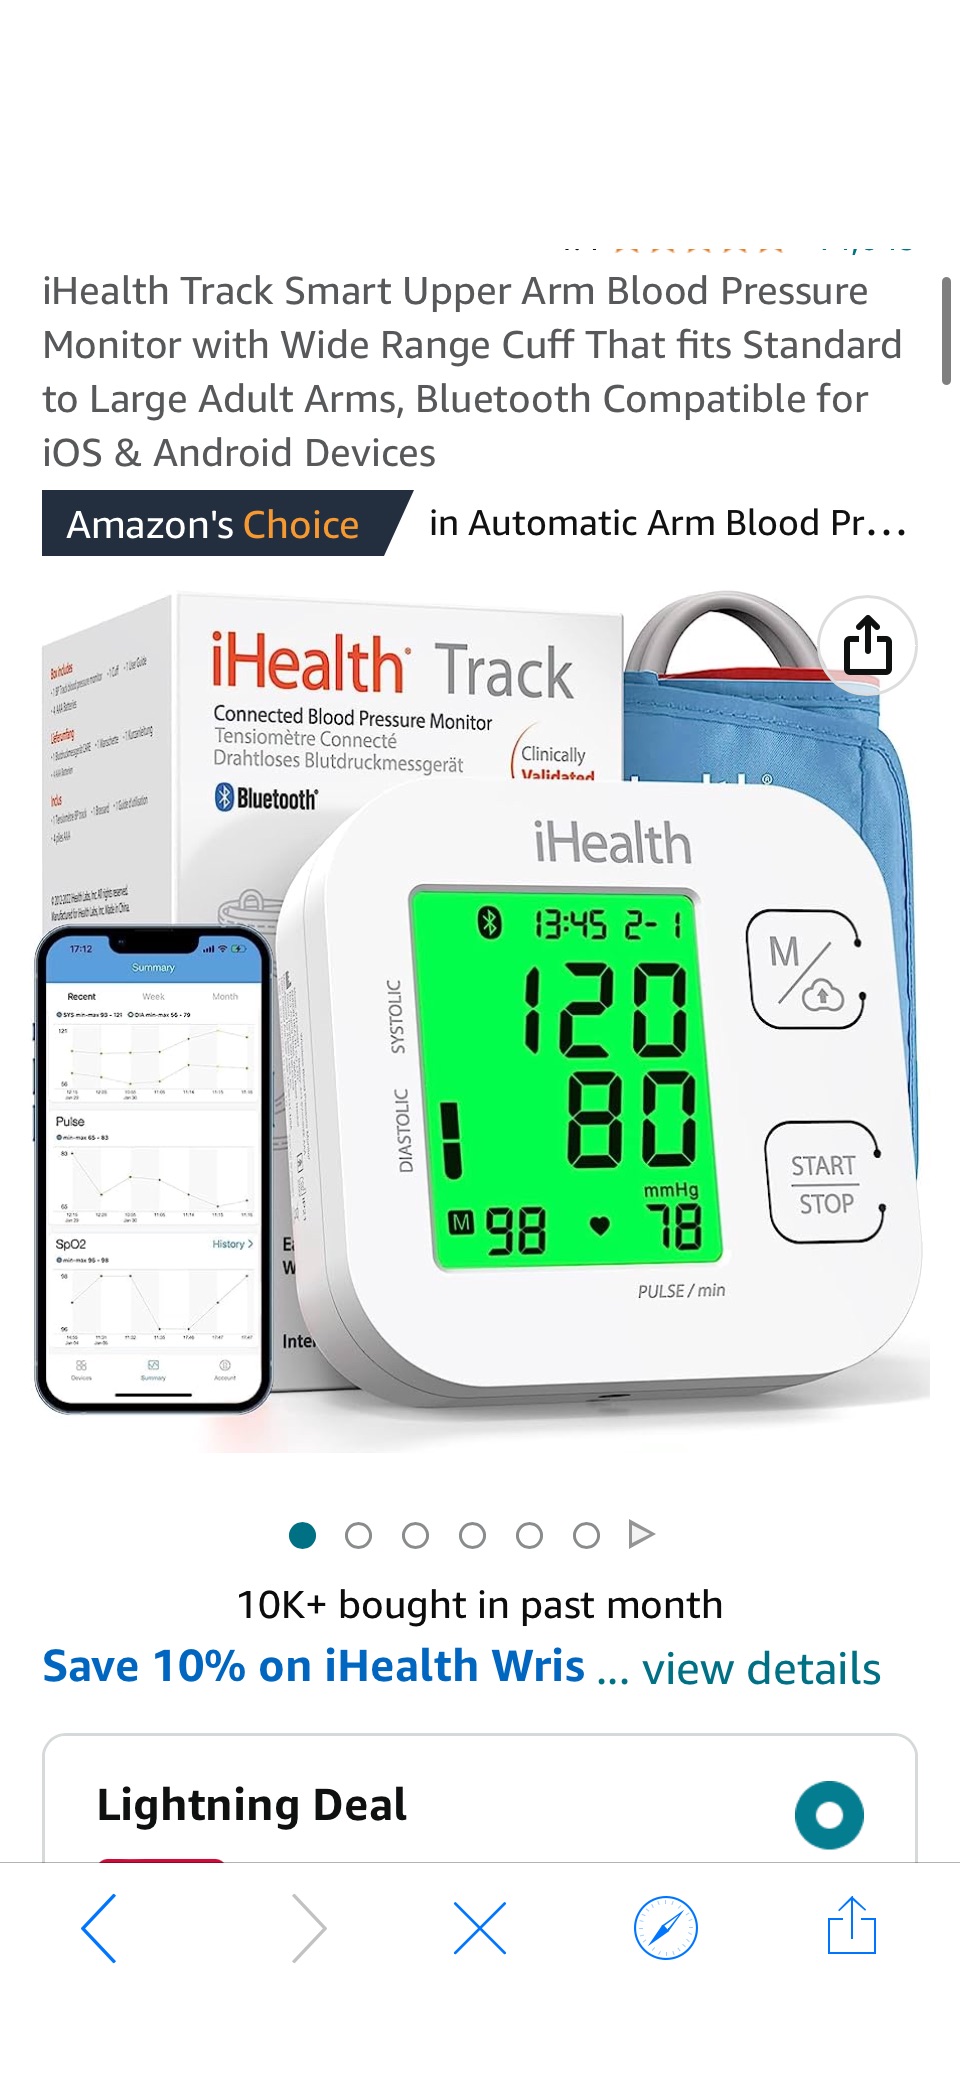 Amazon.com: iHealth Track Smart Upper Arm Blood Pressure Monitor with Wide Range Cuff That fits Standard to Large Adult Arms, Bluetooth Compatible for iOS & Android Devices : Health & Household原价49.99